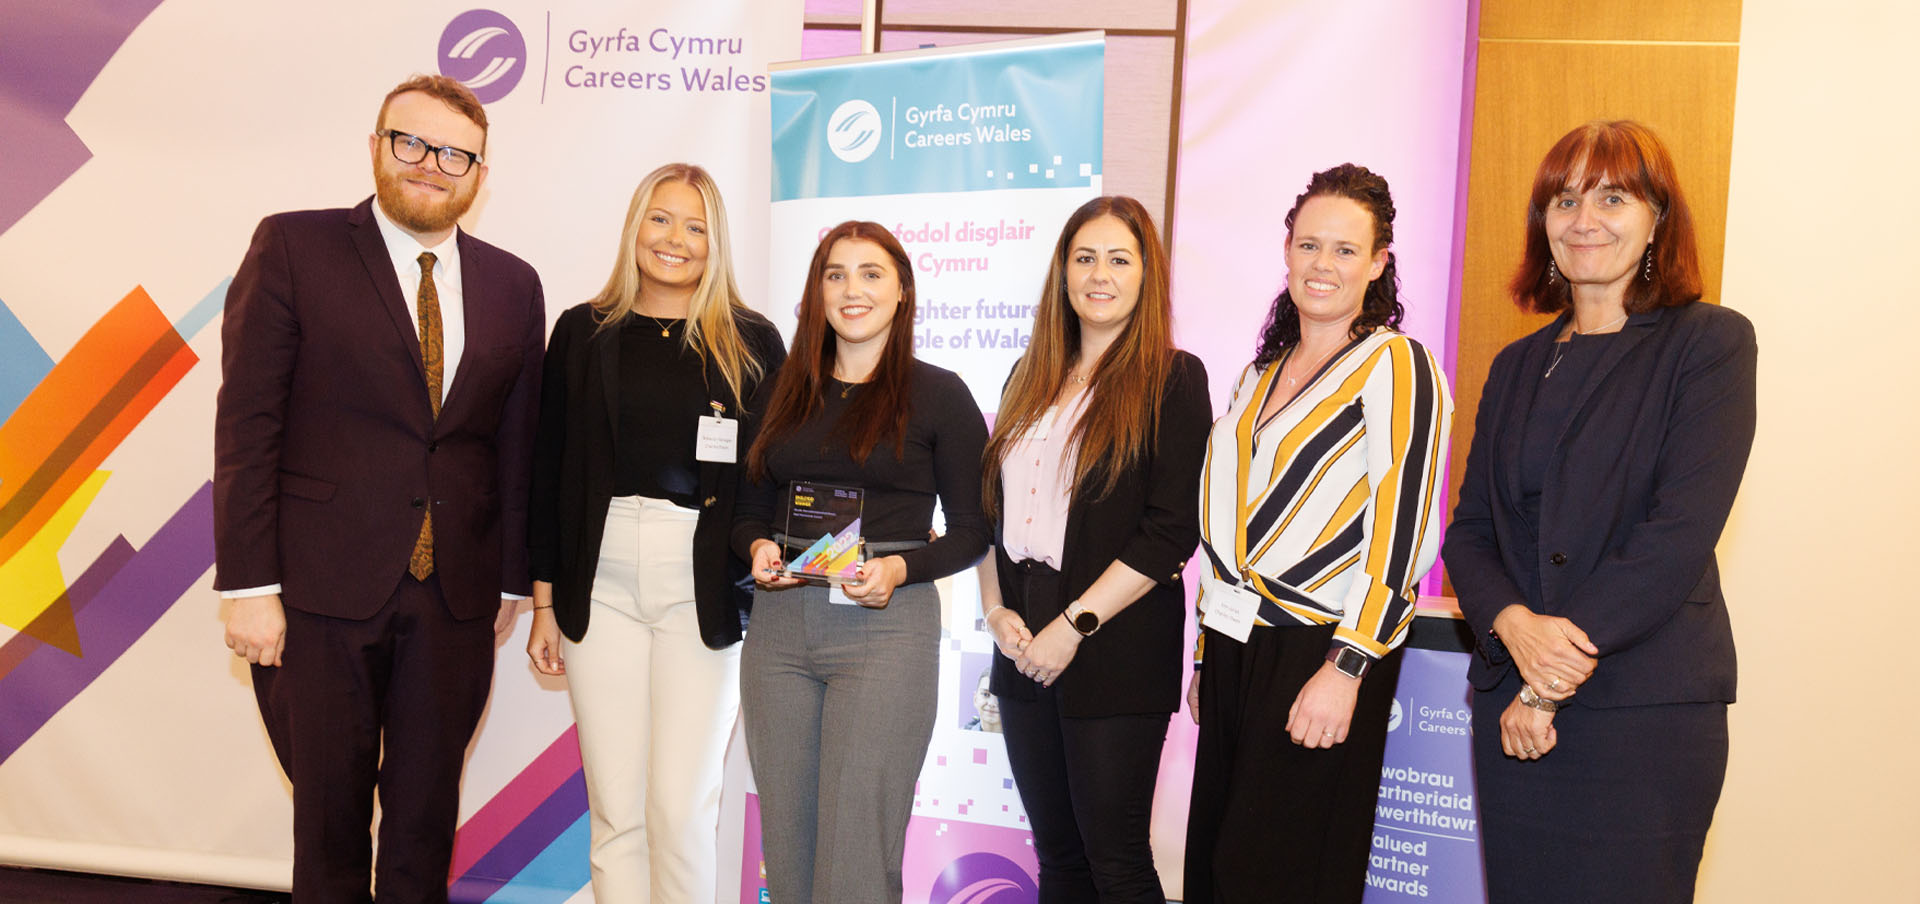 Employees from Charles Owen being presented with their award by presenter Huw Stephens and Nikki Lawrence, Chief Executive, Careers Wales